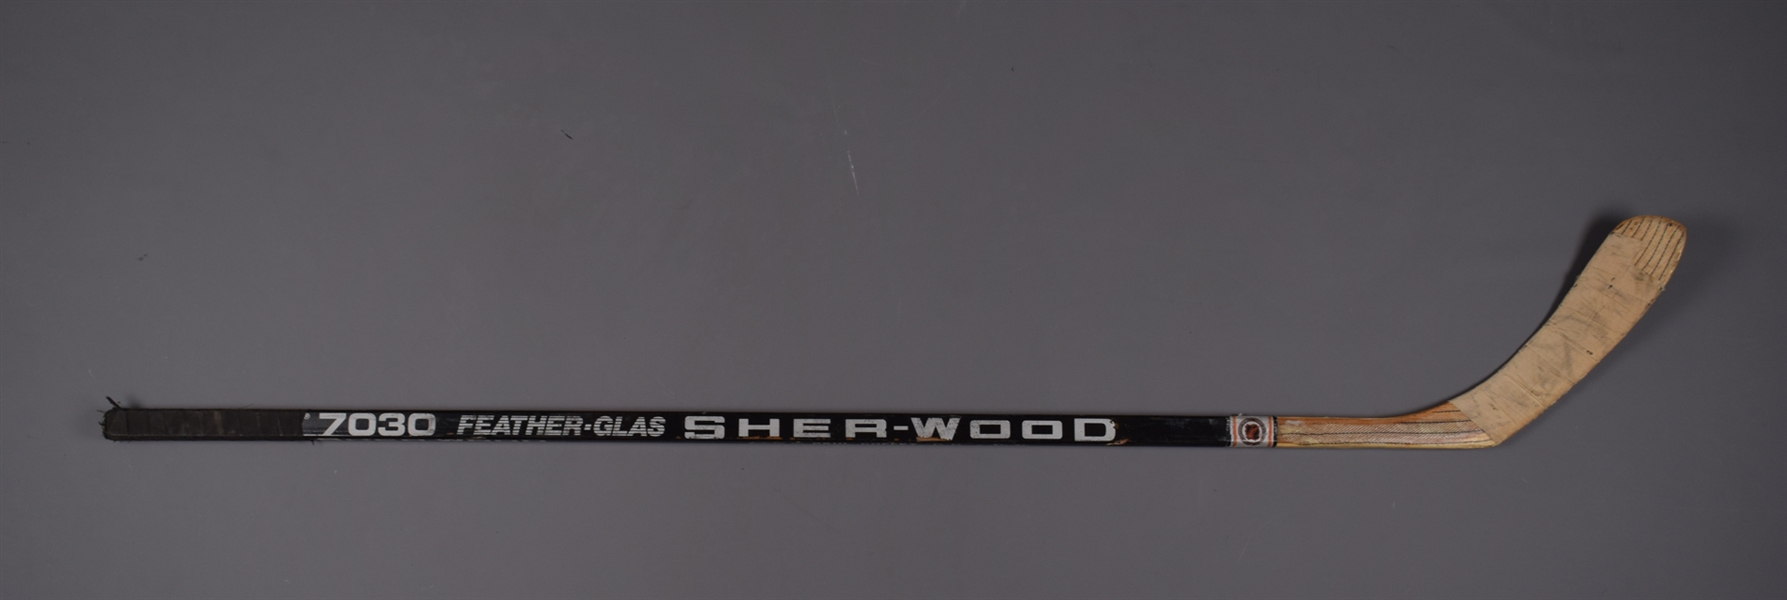 Paul Coffeys Early-1990s Pittsburgh Penguins Sher-Wood Game-Used Stick 